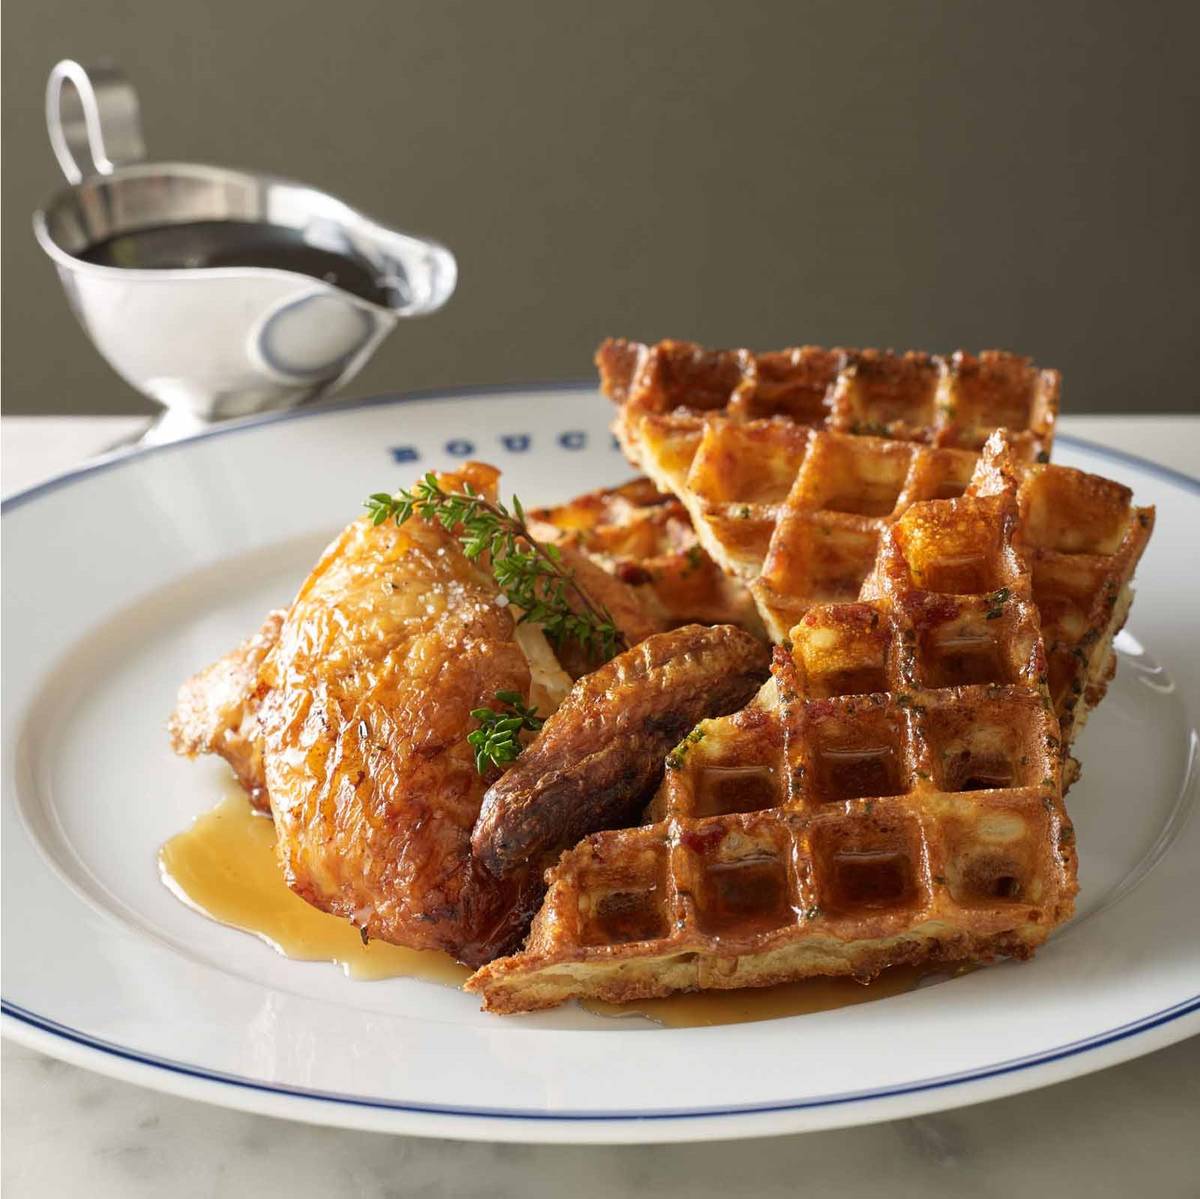 Roasted chicken with a bacon-chive waffle is on the menu during Bouchon's brunch. (Bouchon)